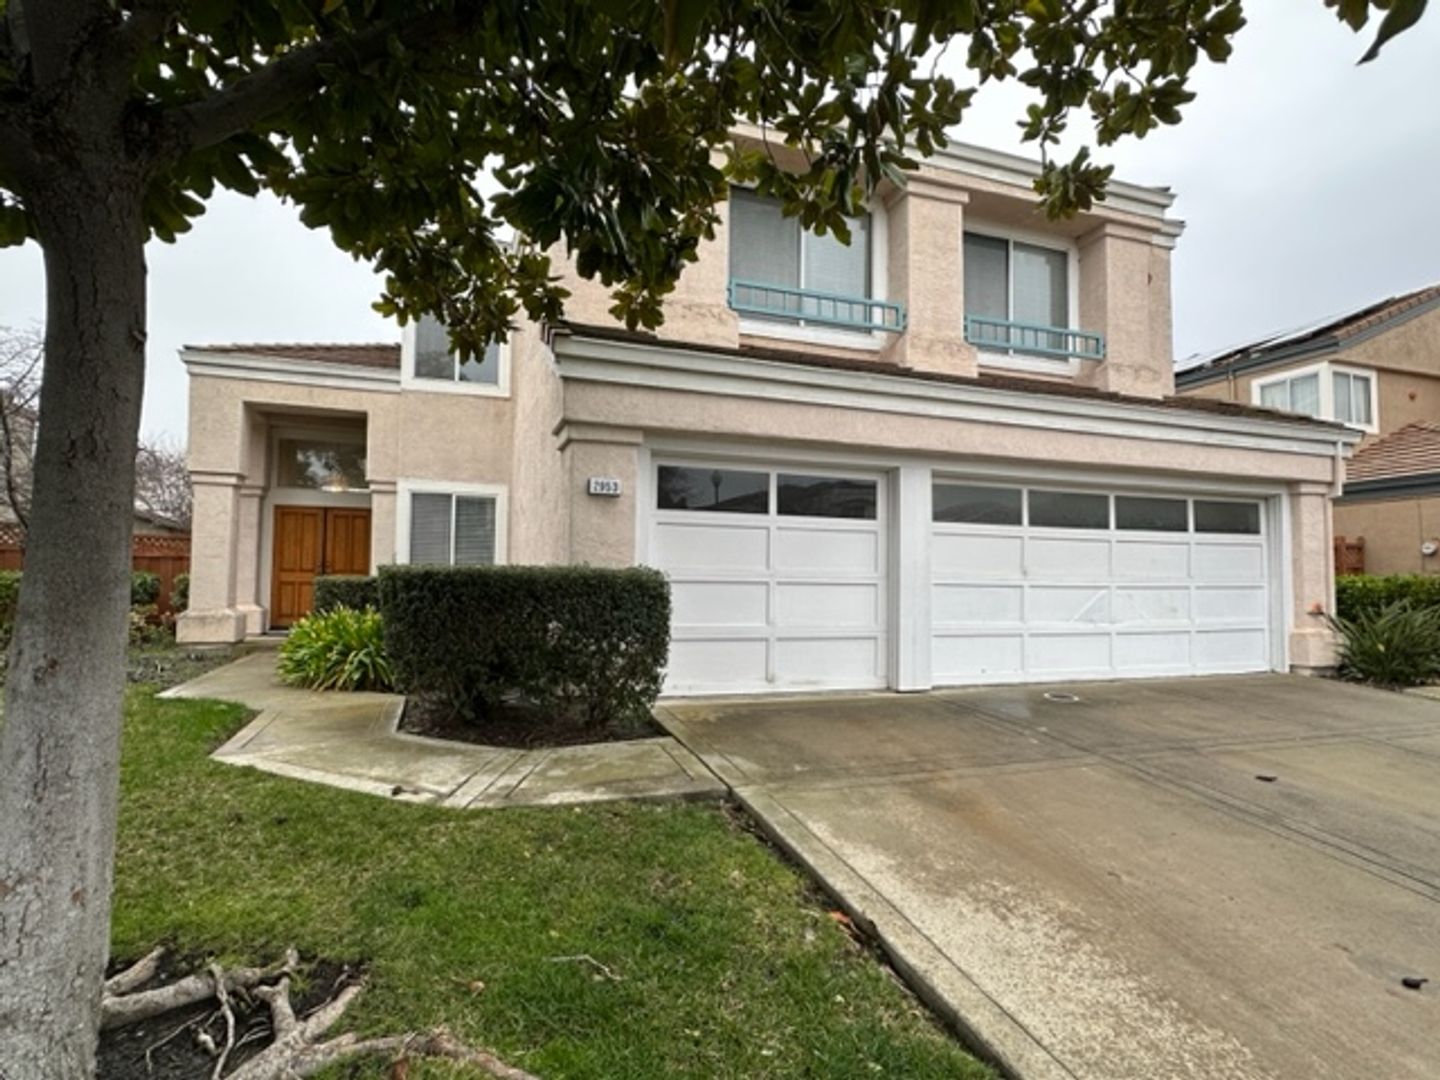 Union City 5 BD + Loft/ 3.5 BA Detached Home in Gated Community ~ Yard, Community Pool, Pets welcome, Great Schools